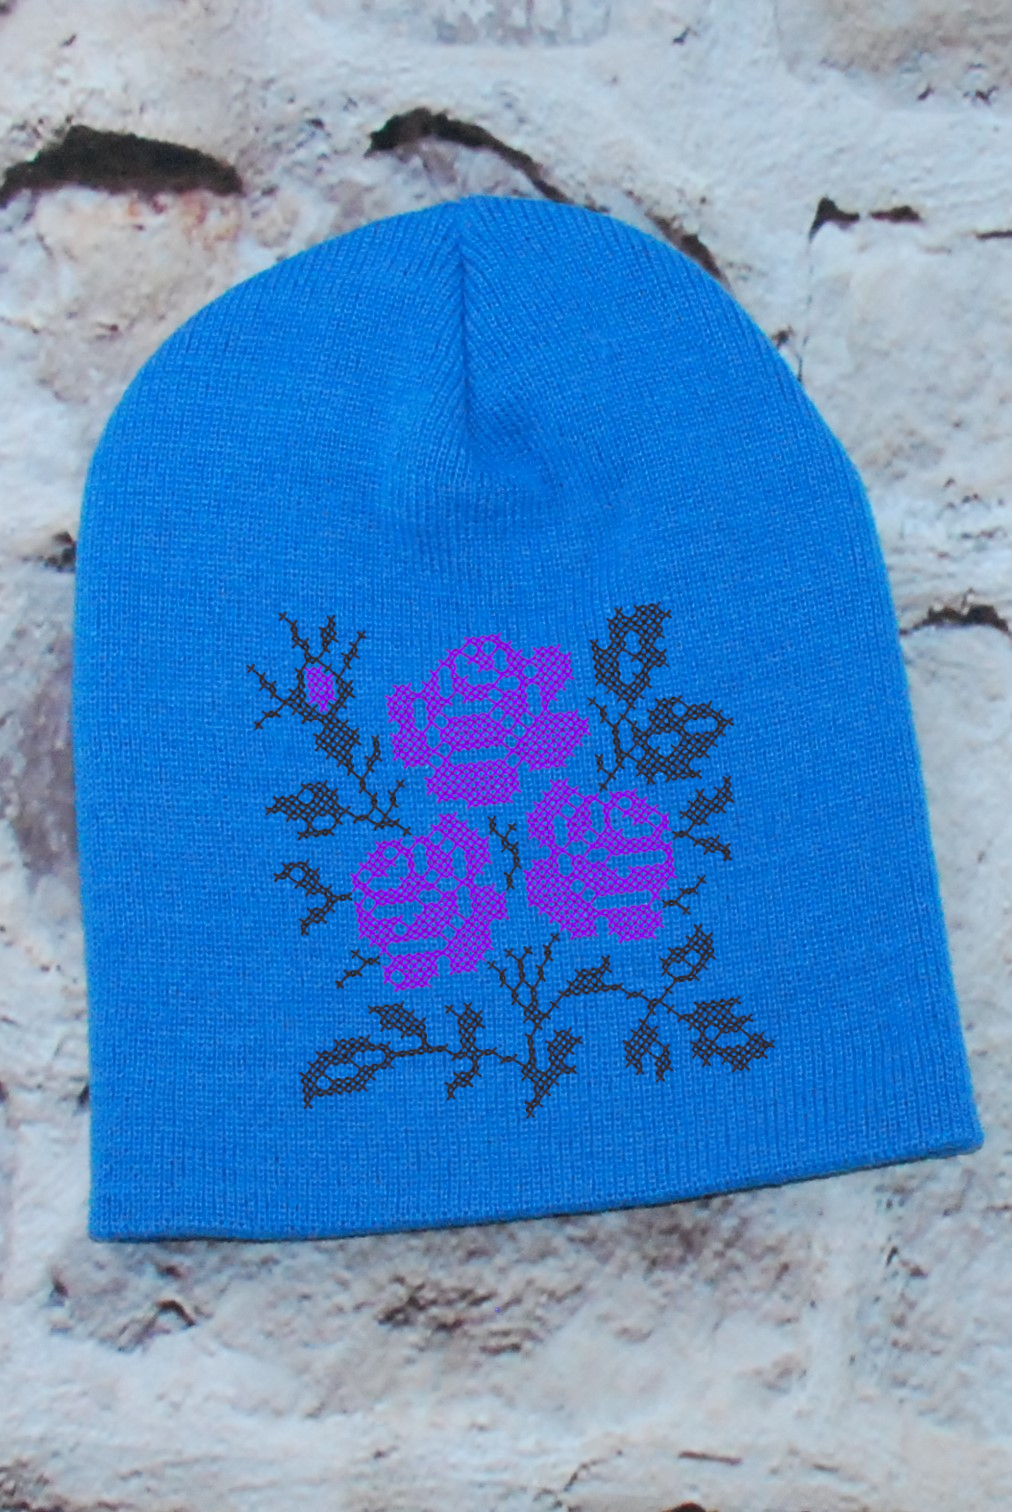 Knitted embroidered beanie hat "Roses" Blue